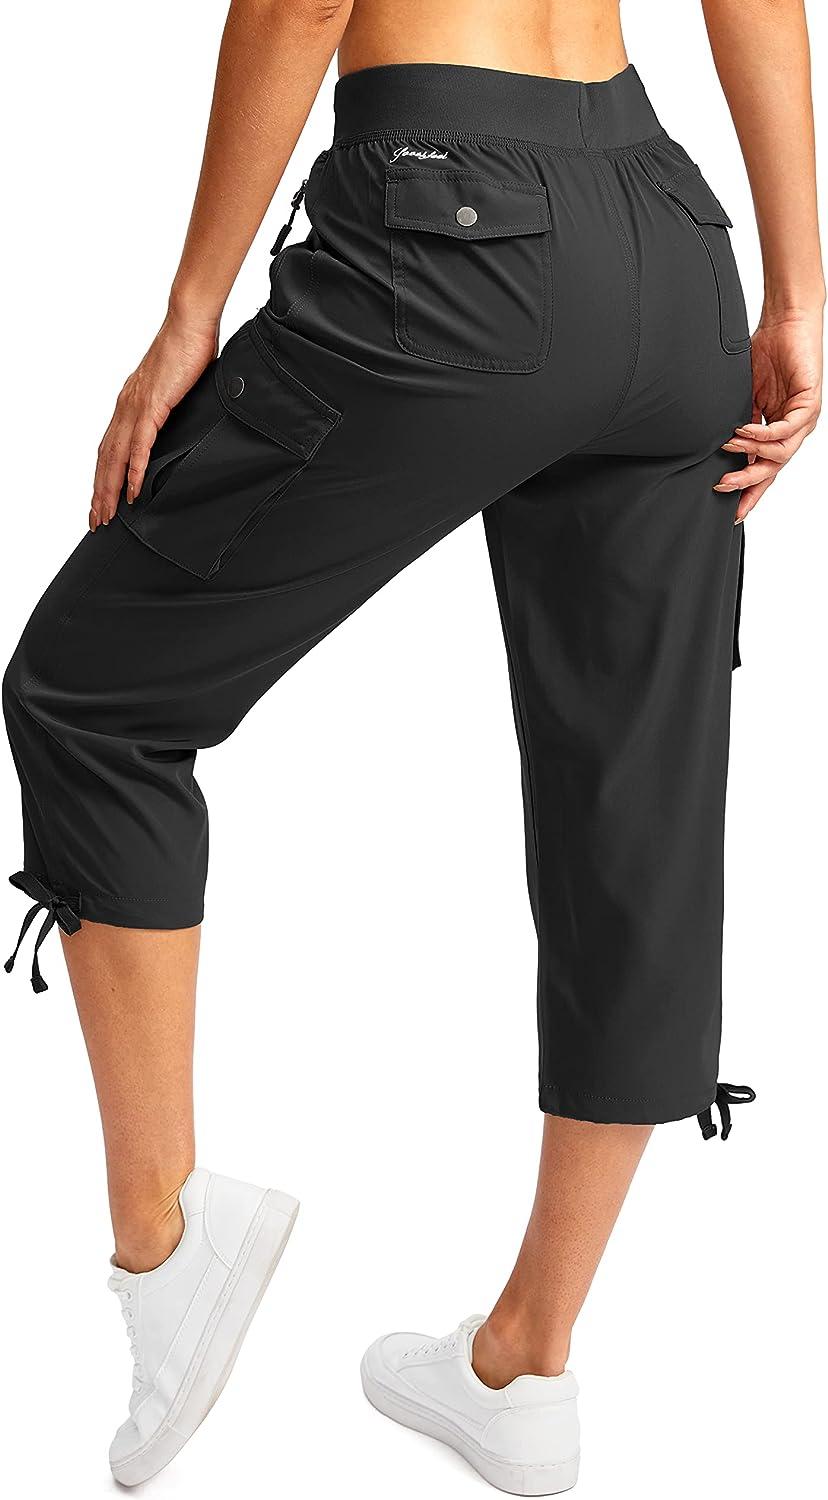 Soothfeel Women's Cargo Capris Pants with 6 Pockets Lightweight Quick Dry  Travel Hiking Summer Pants for Women Casual Black X-Large